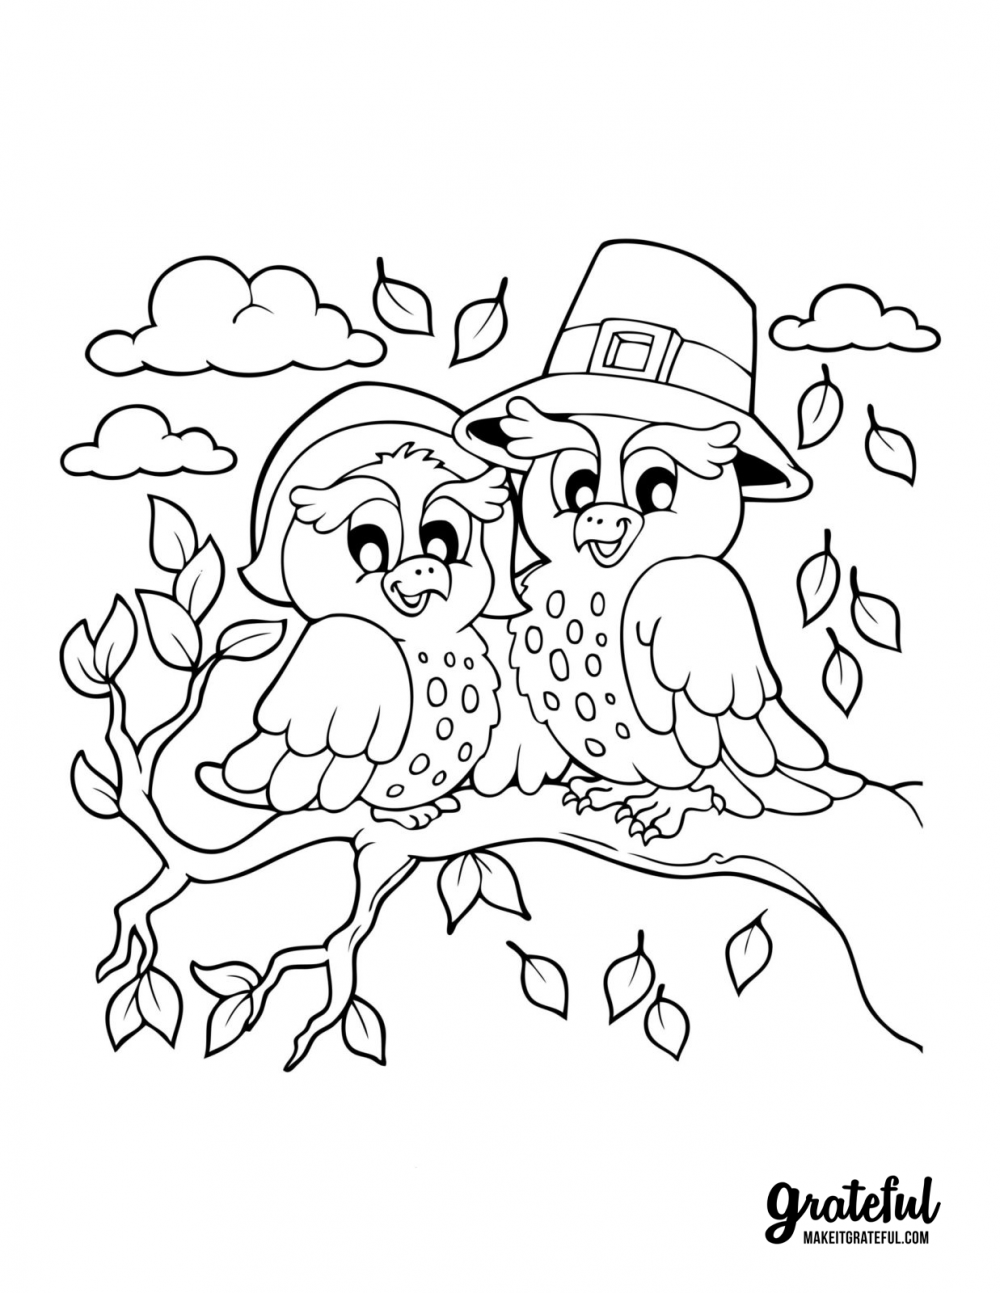 Pilgrim owls - Thanksgiving coloring pages